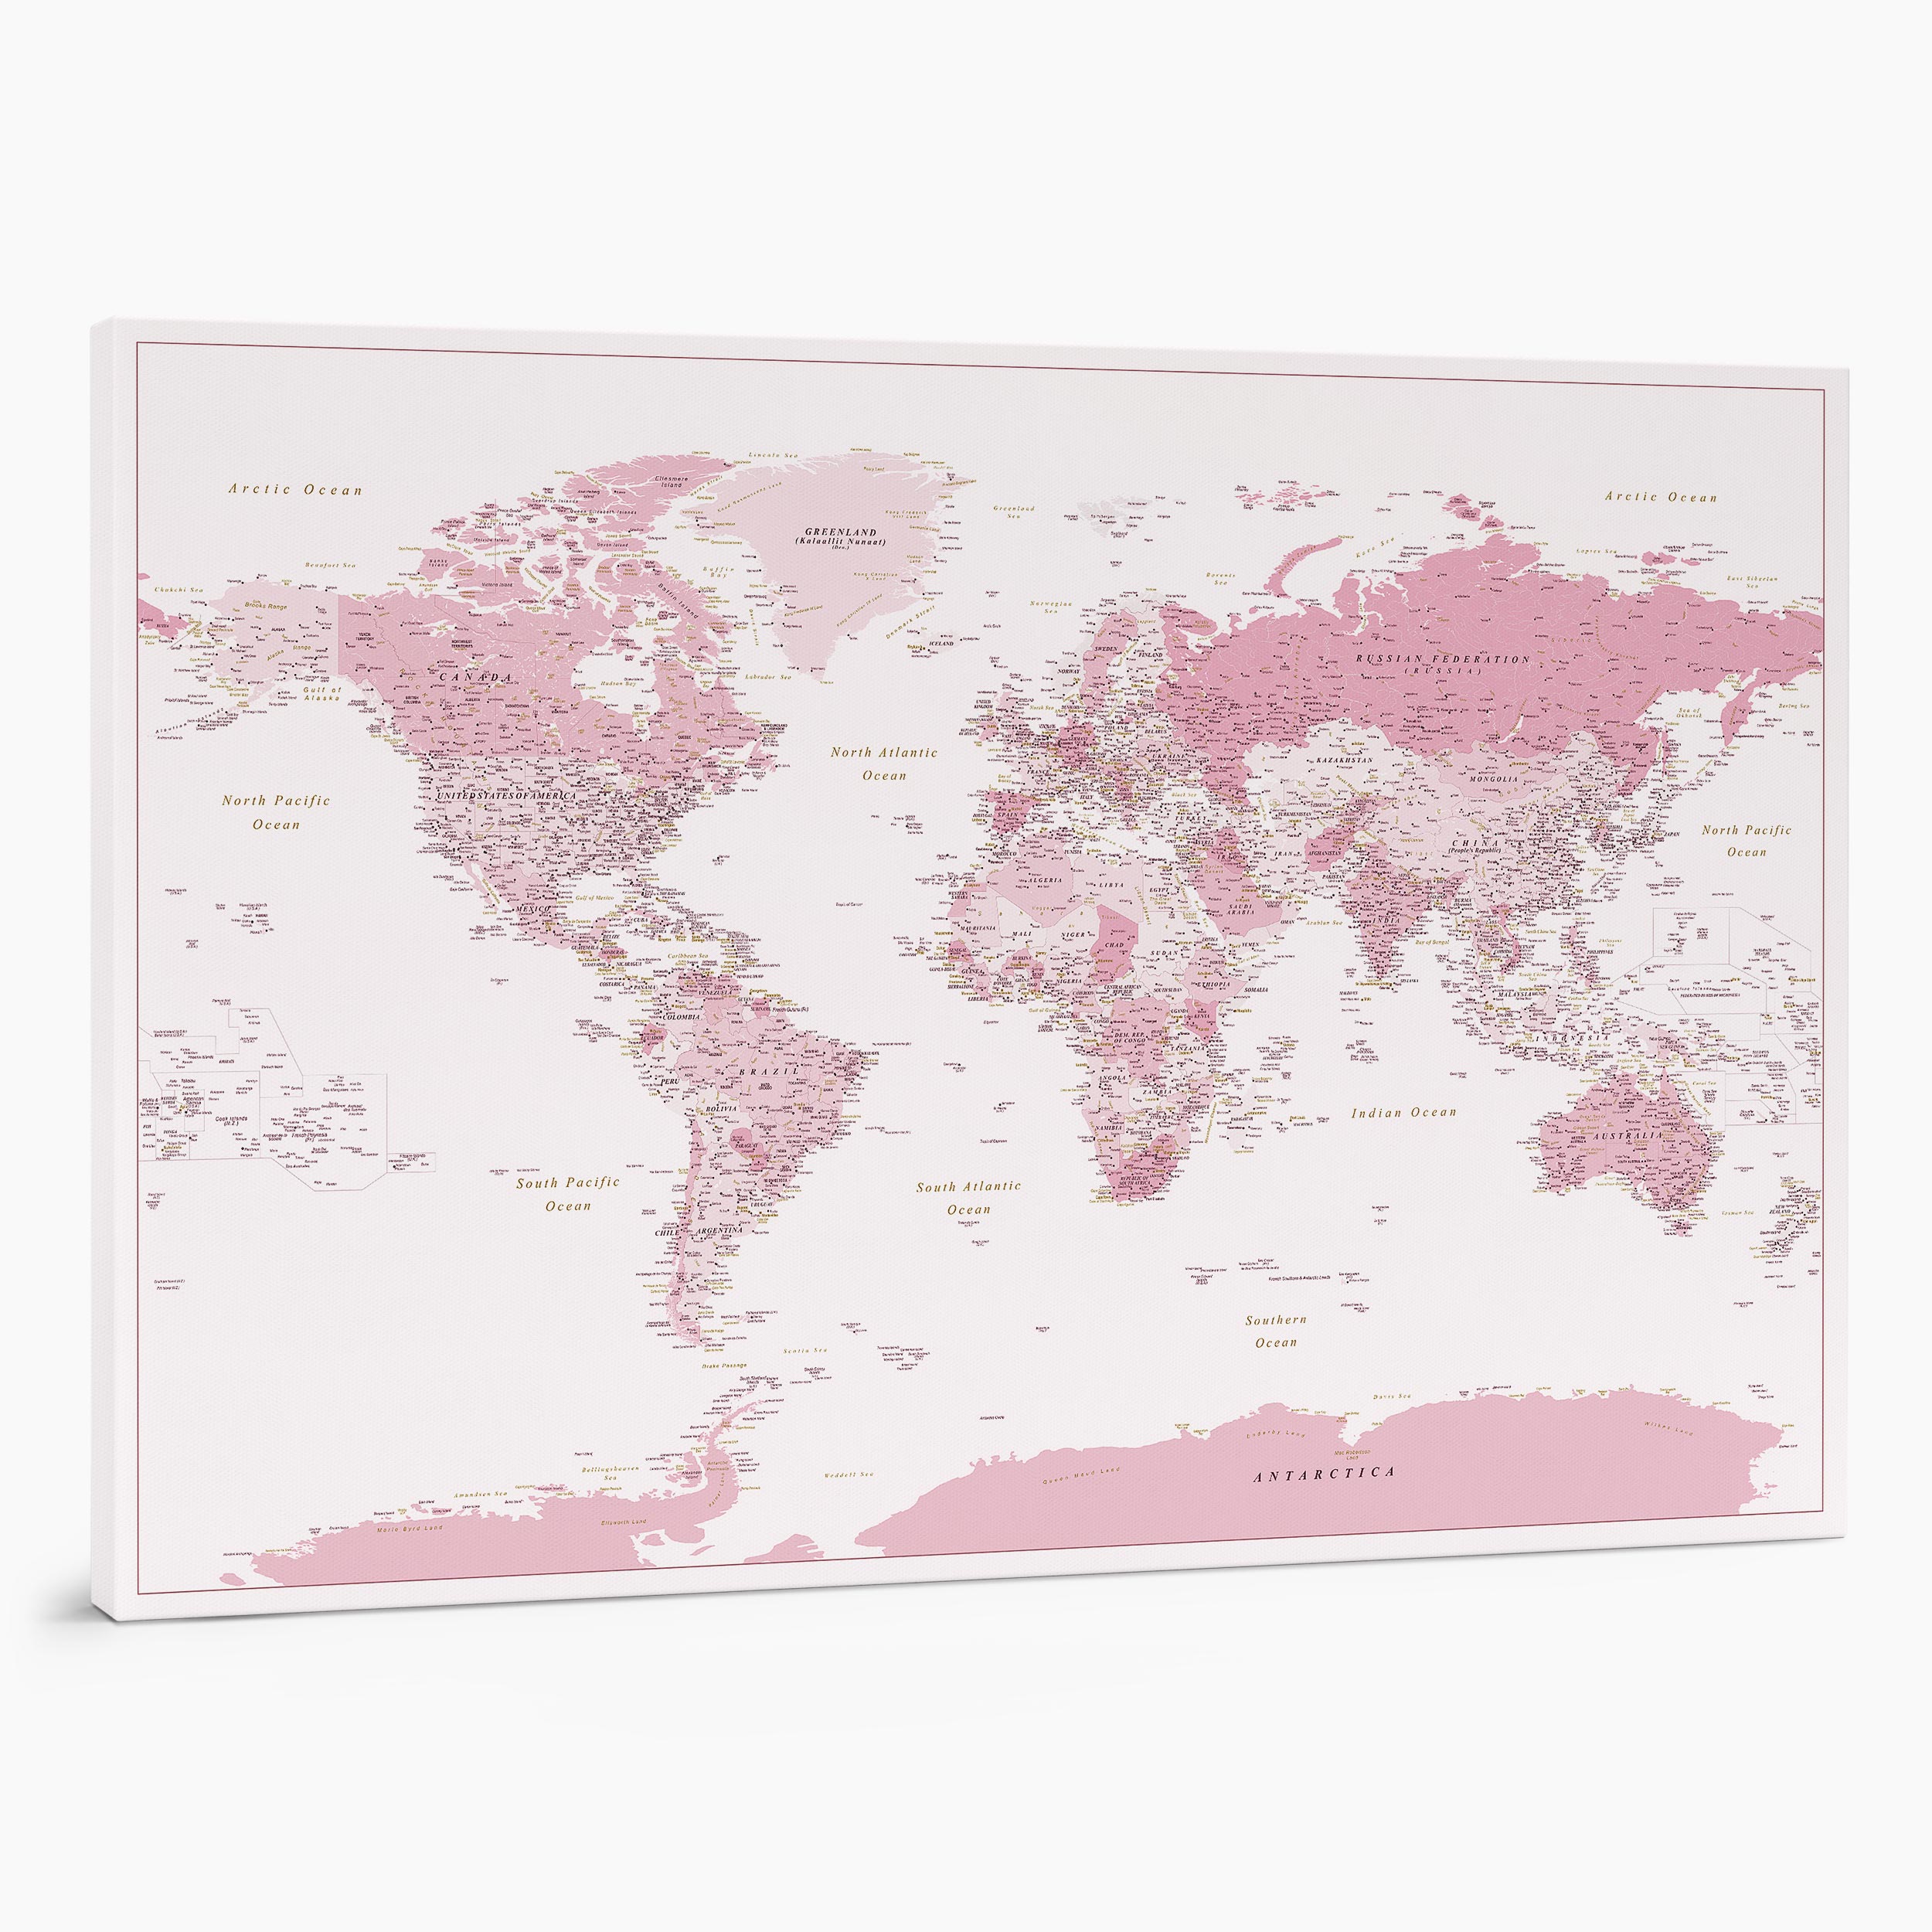 12P large push pin world map to track places visited on canvas pink